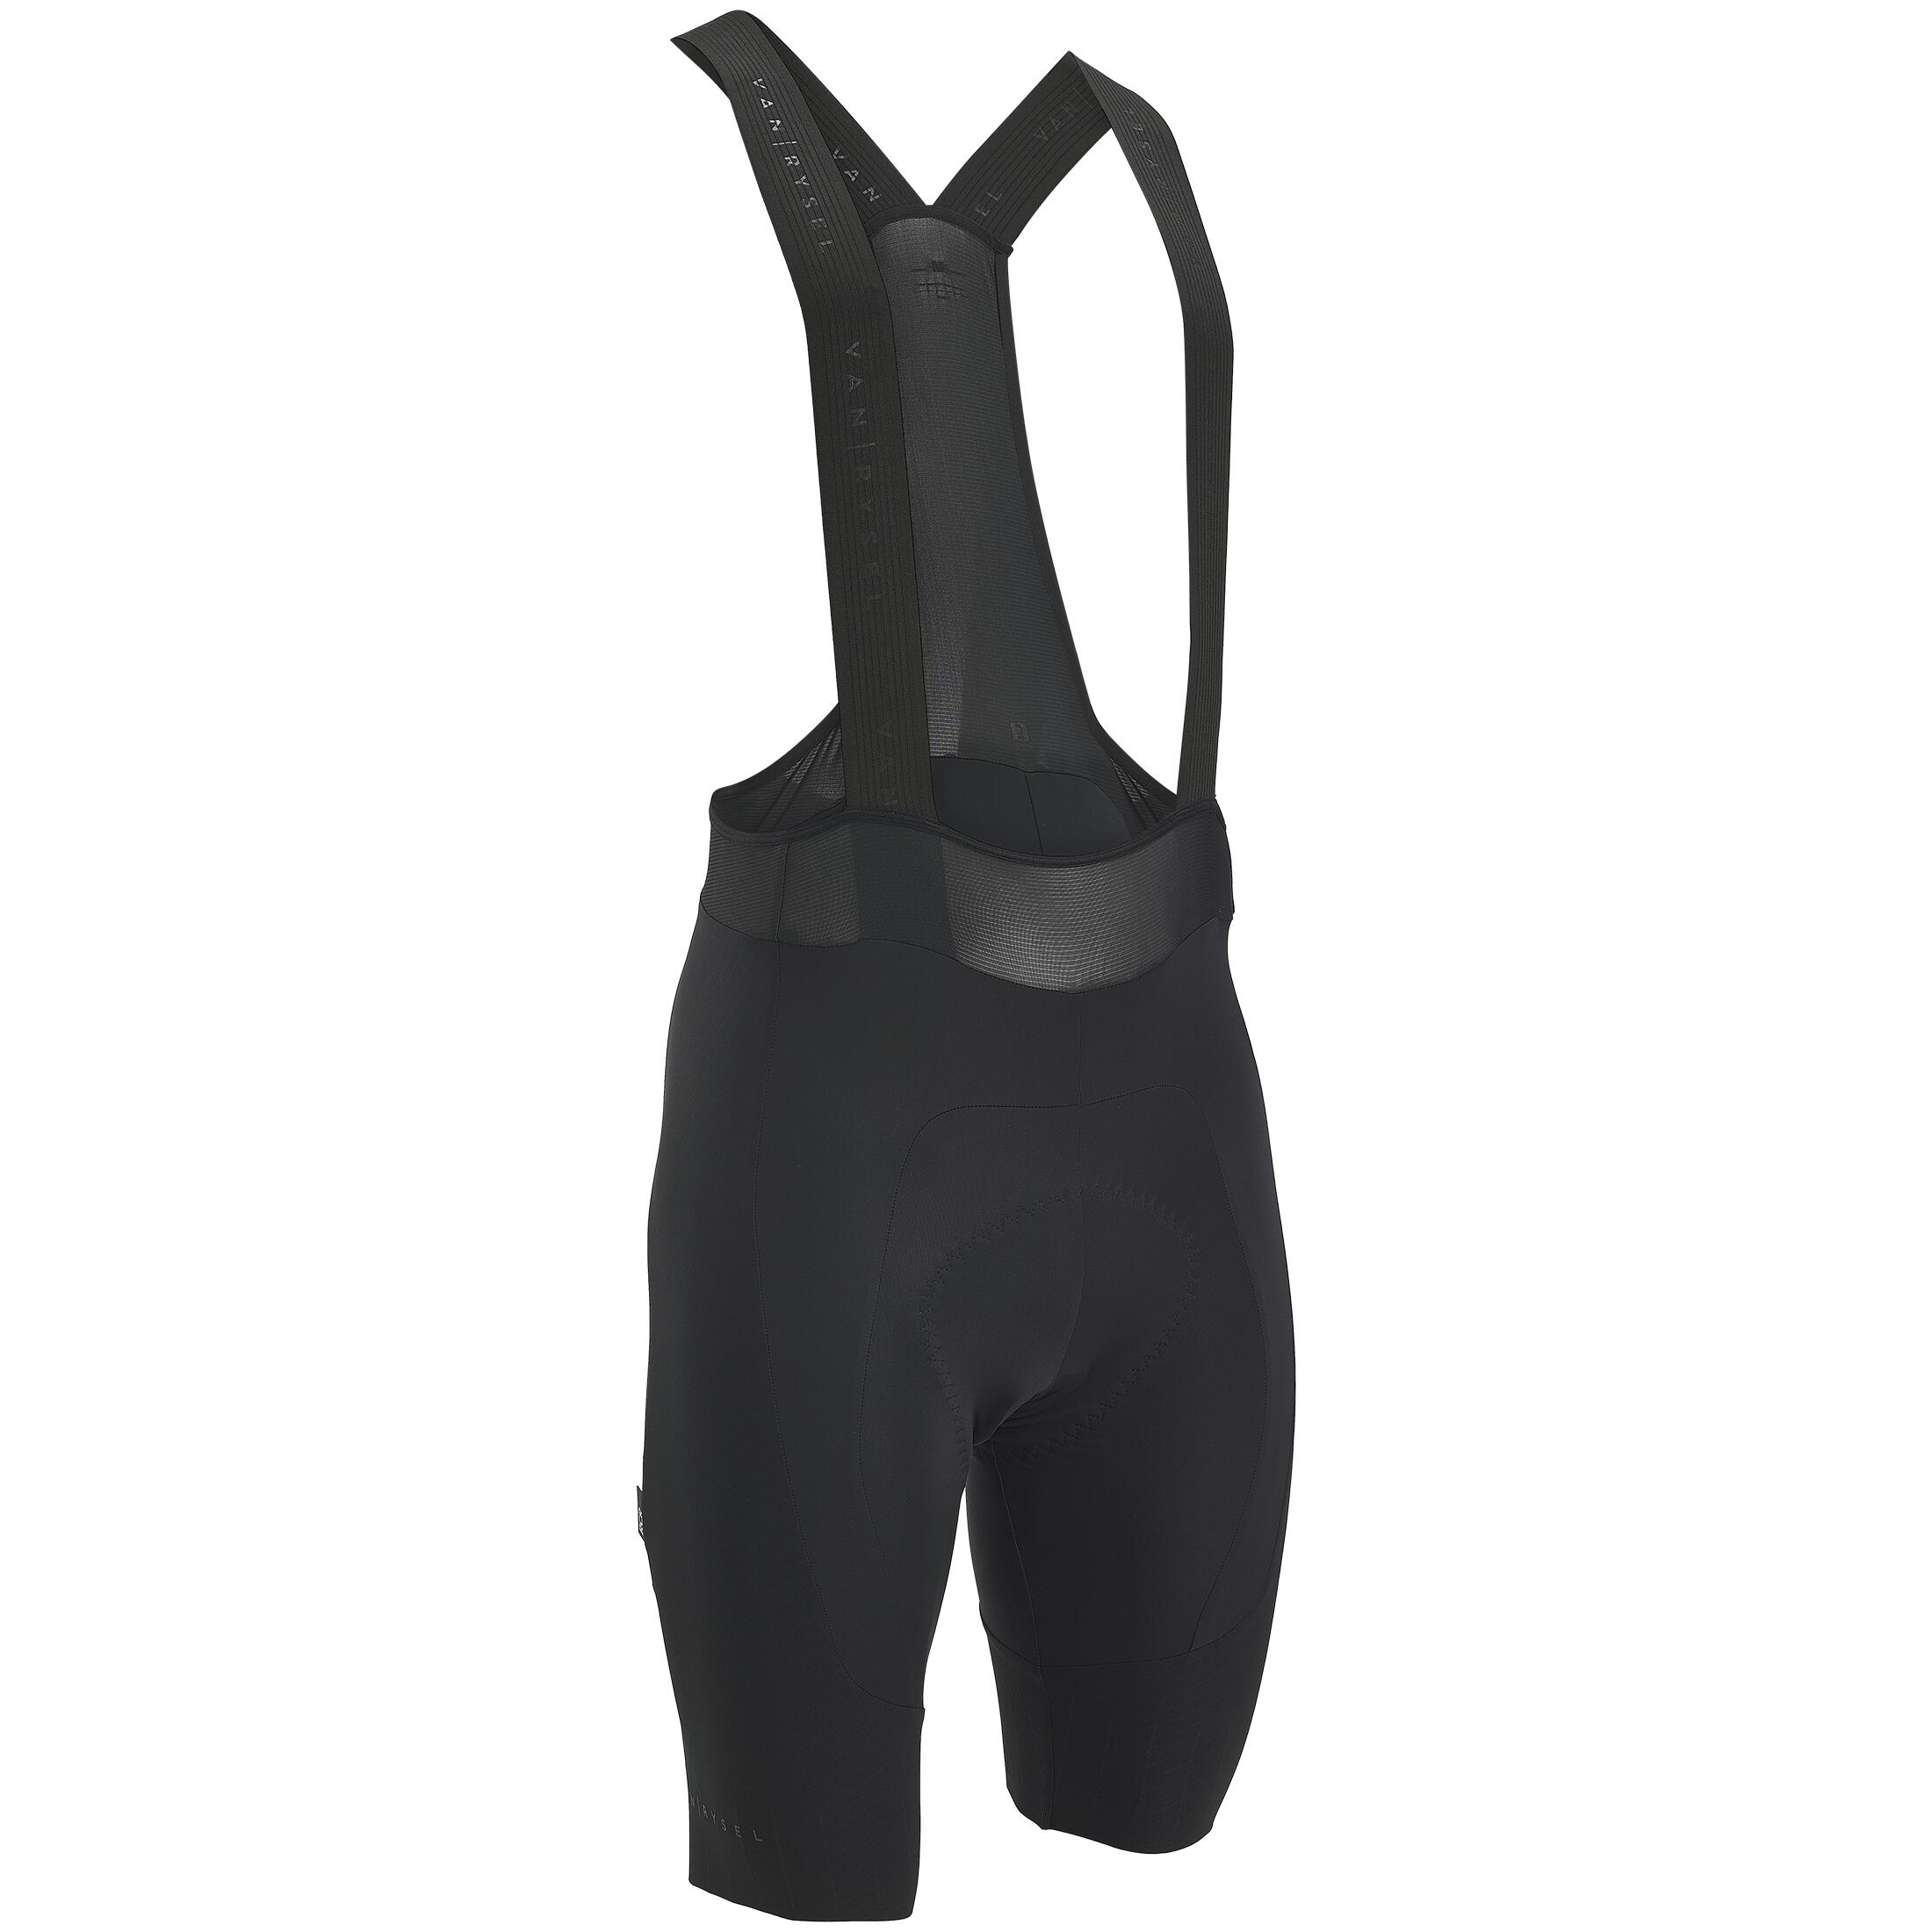 JY638 Cuissard cycliste short cycling Taille S-3XL 